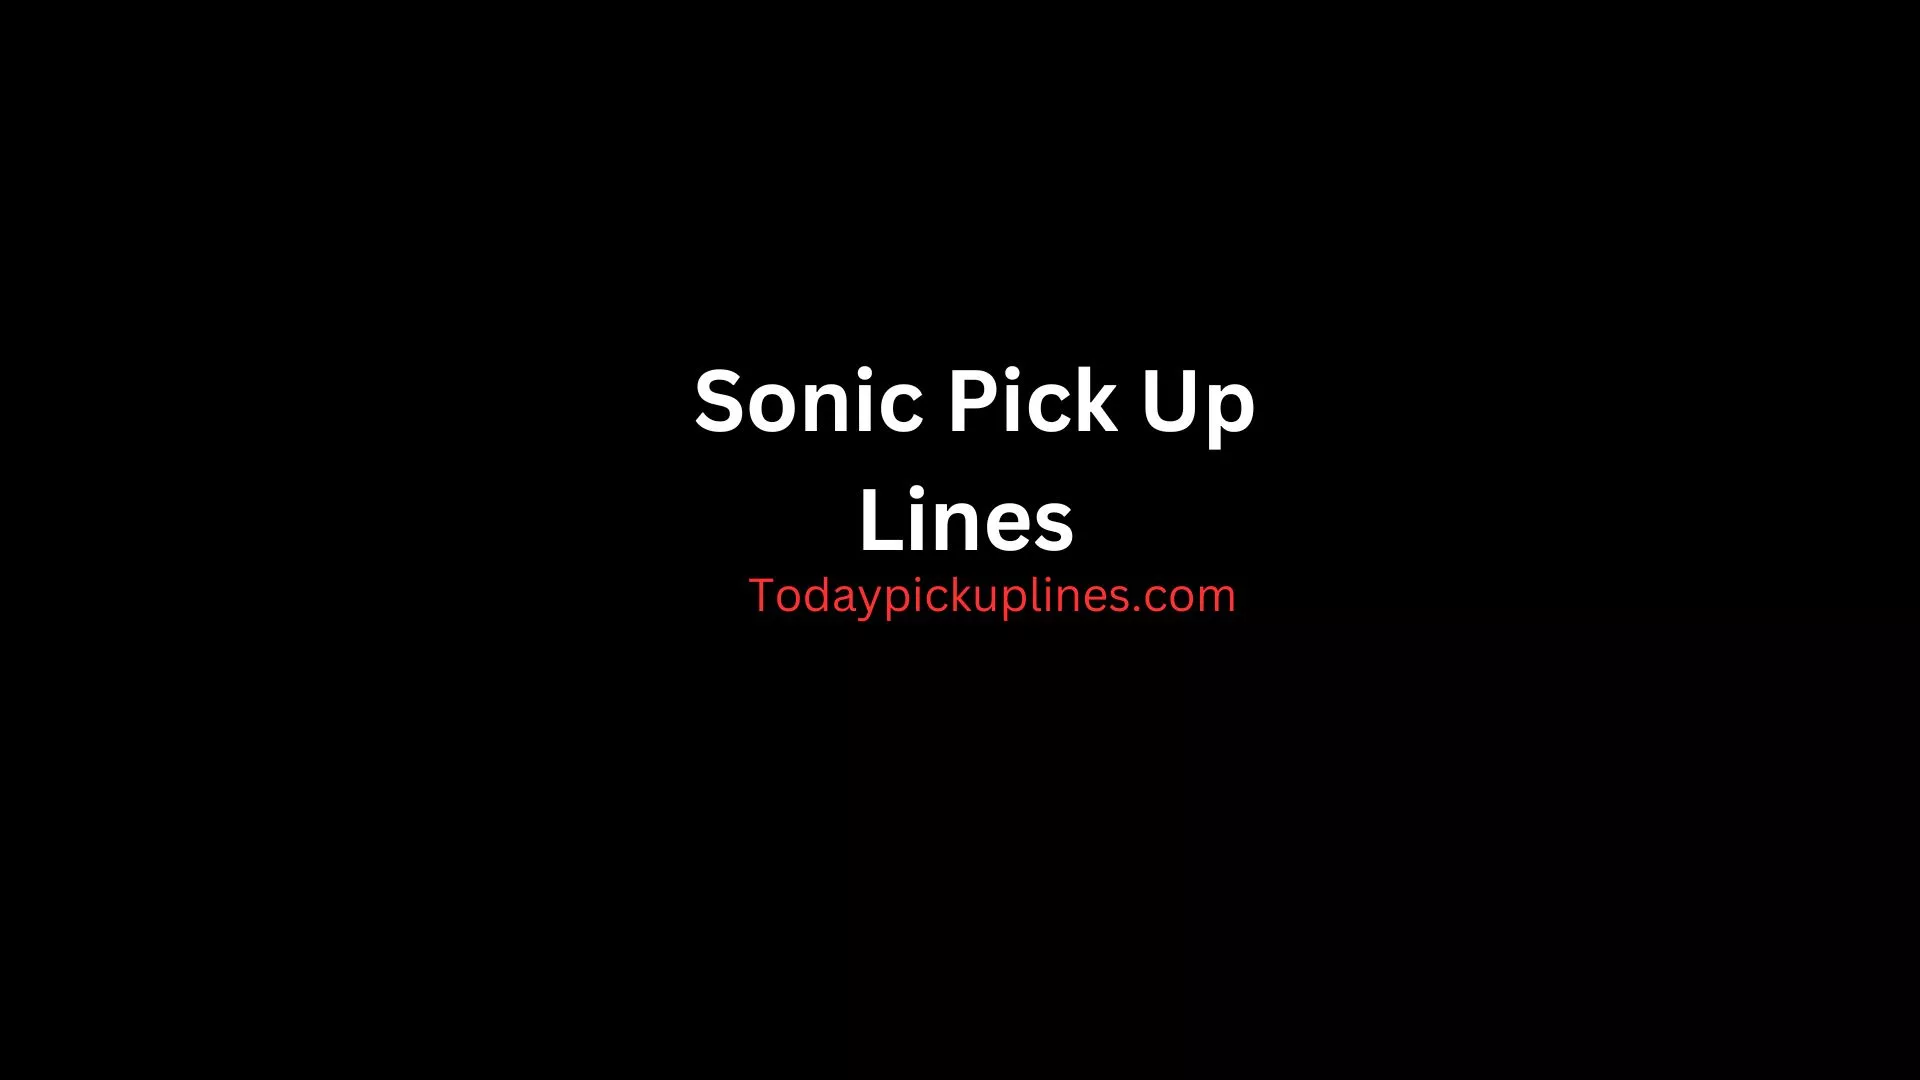 Sonic Pick Up Lines